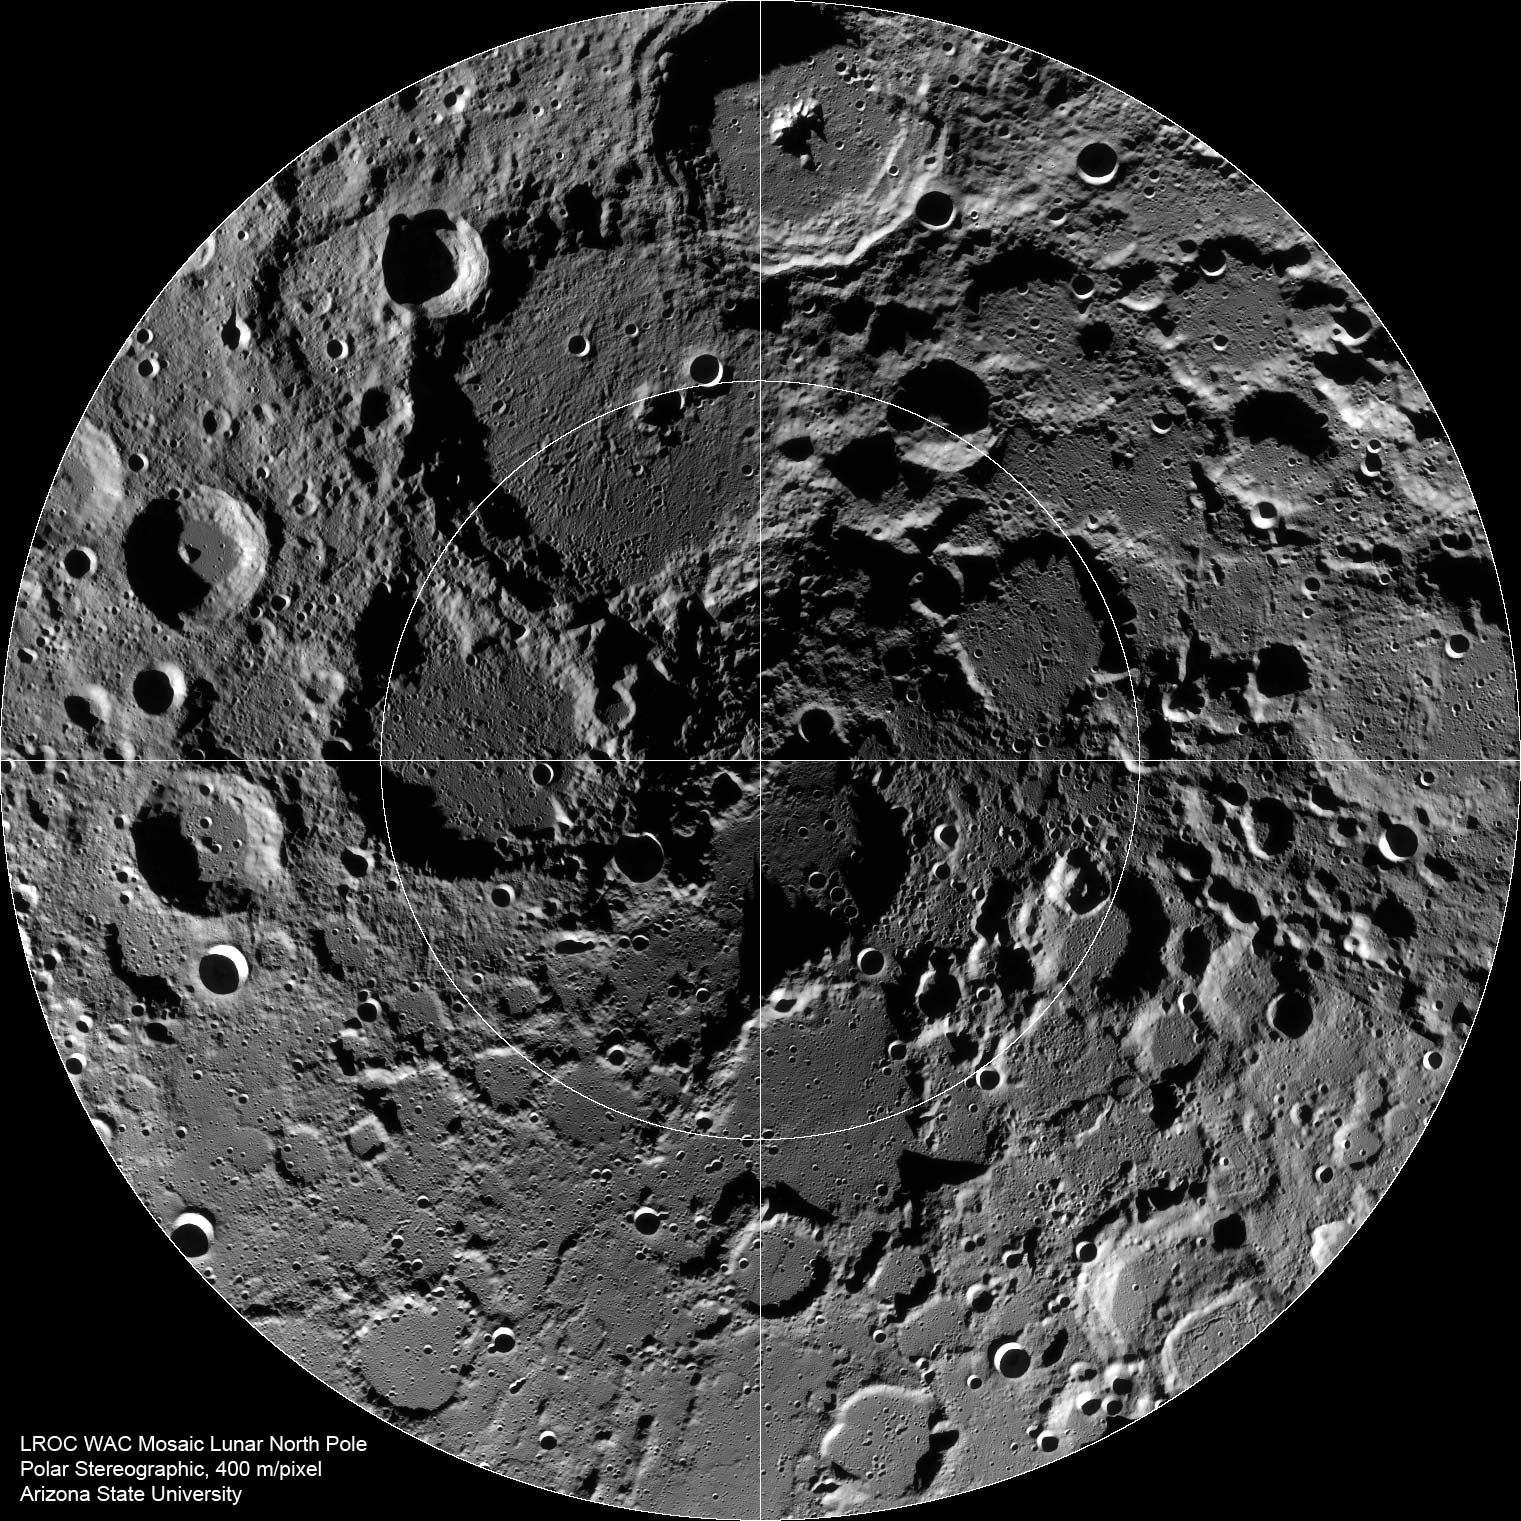 Craters riddle the moons North Pole with the largest creating large dark grey pits. The darkest colors are at the poles, since there is less sunlight that illuminates it. The further you move out from the poles to the edge of the captured image, the lighter it becomes.